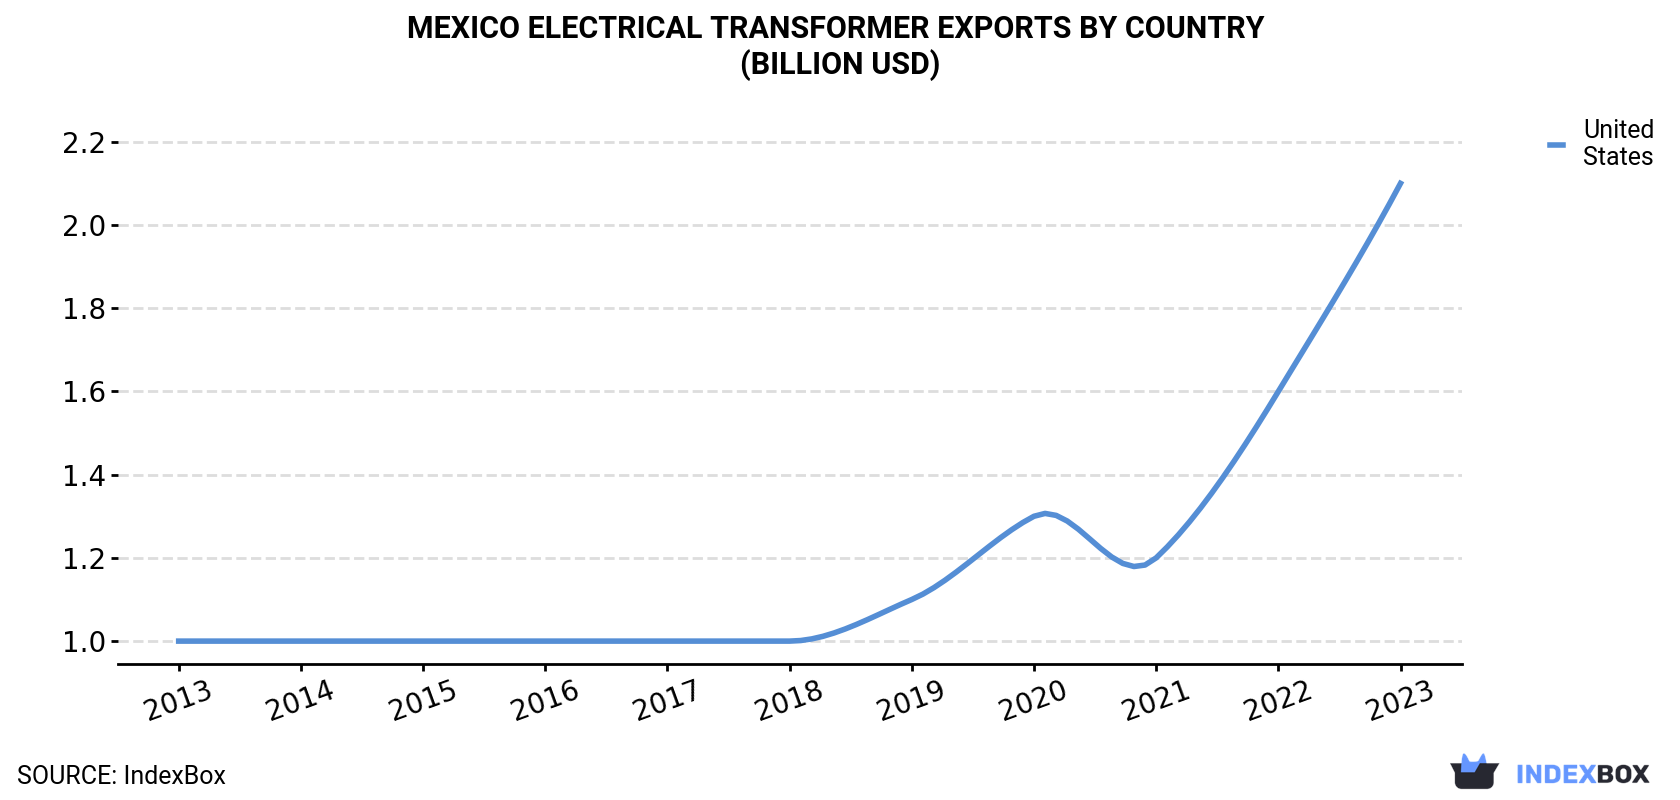 Mexico Electrical Transformer Exports By Country (Billion USD)